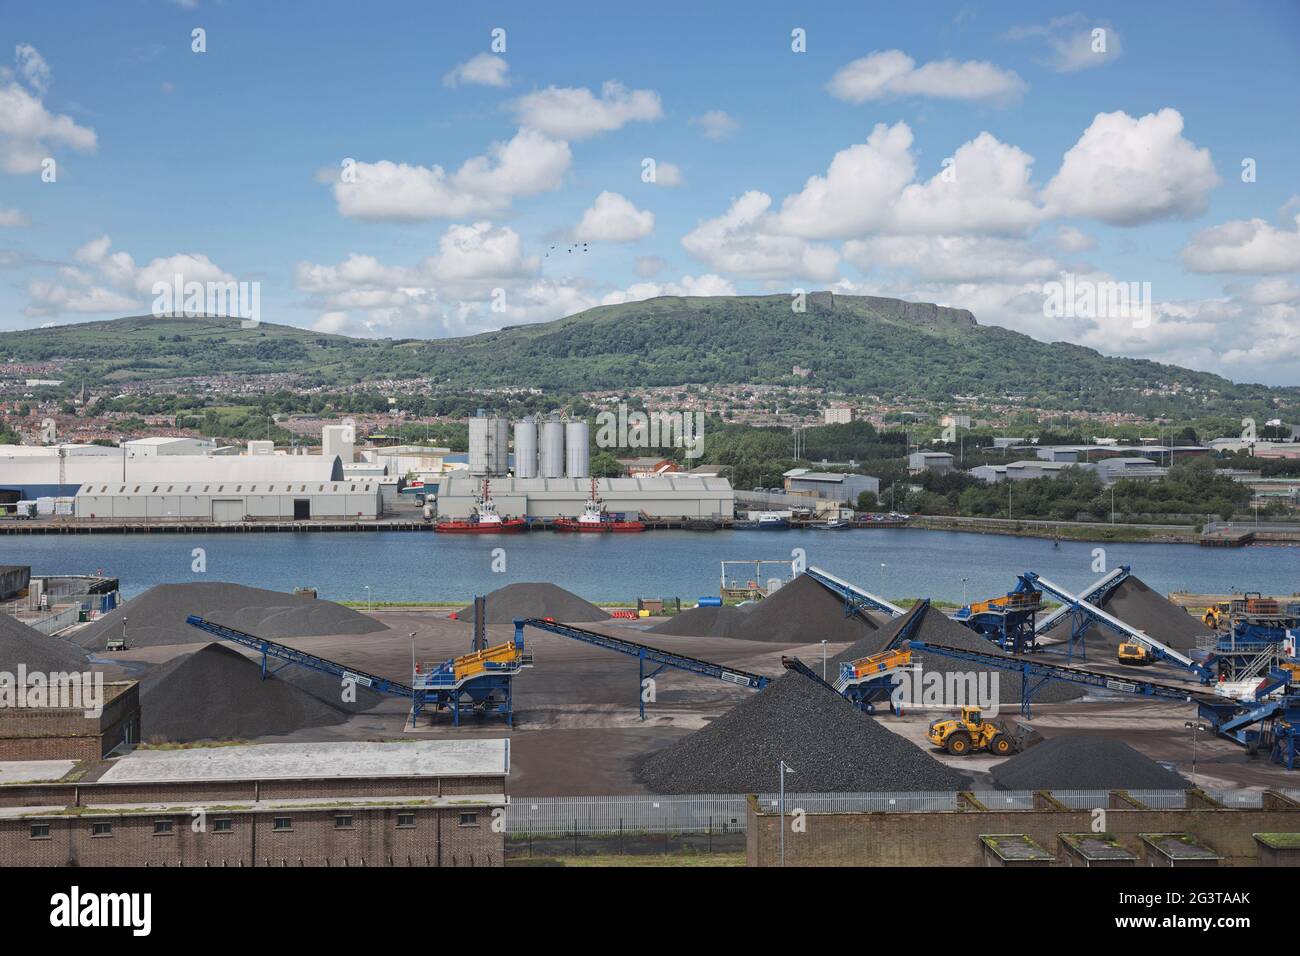 Belfast dockland and Larsen Company with Carrs glen and Napoleon's Nose in the background in Belfast, Ireland, UK. Stock Photo